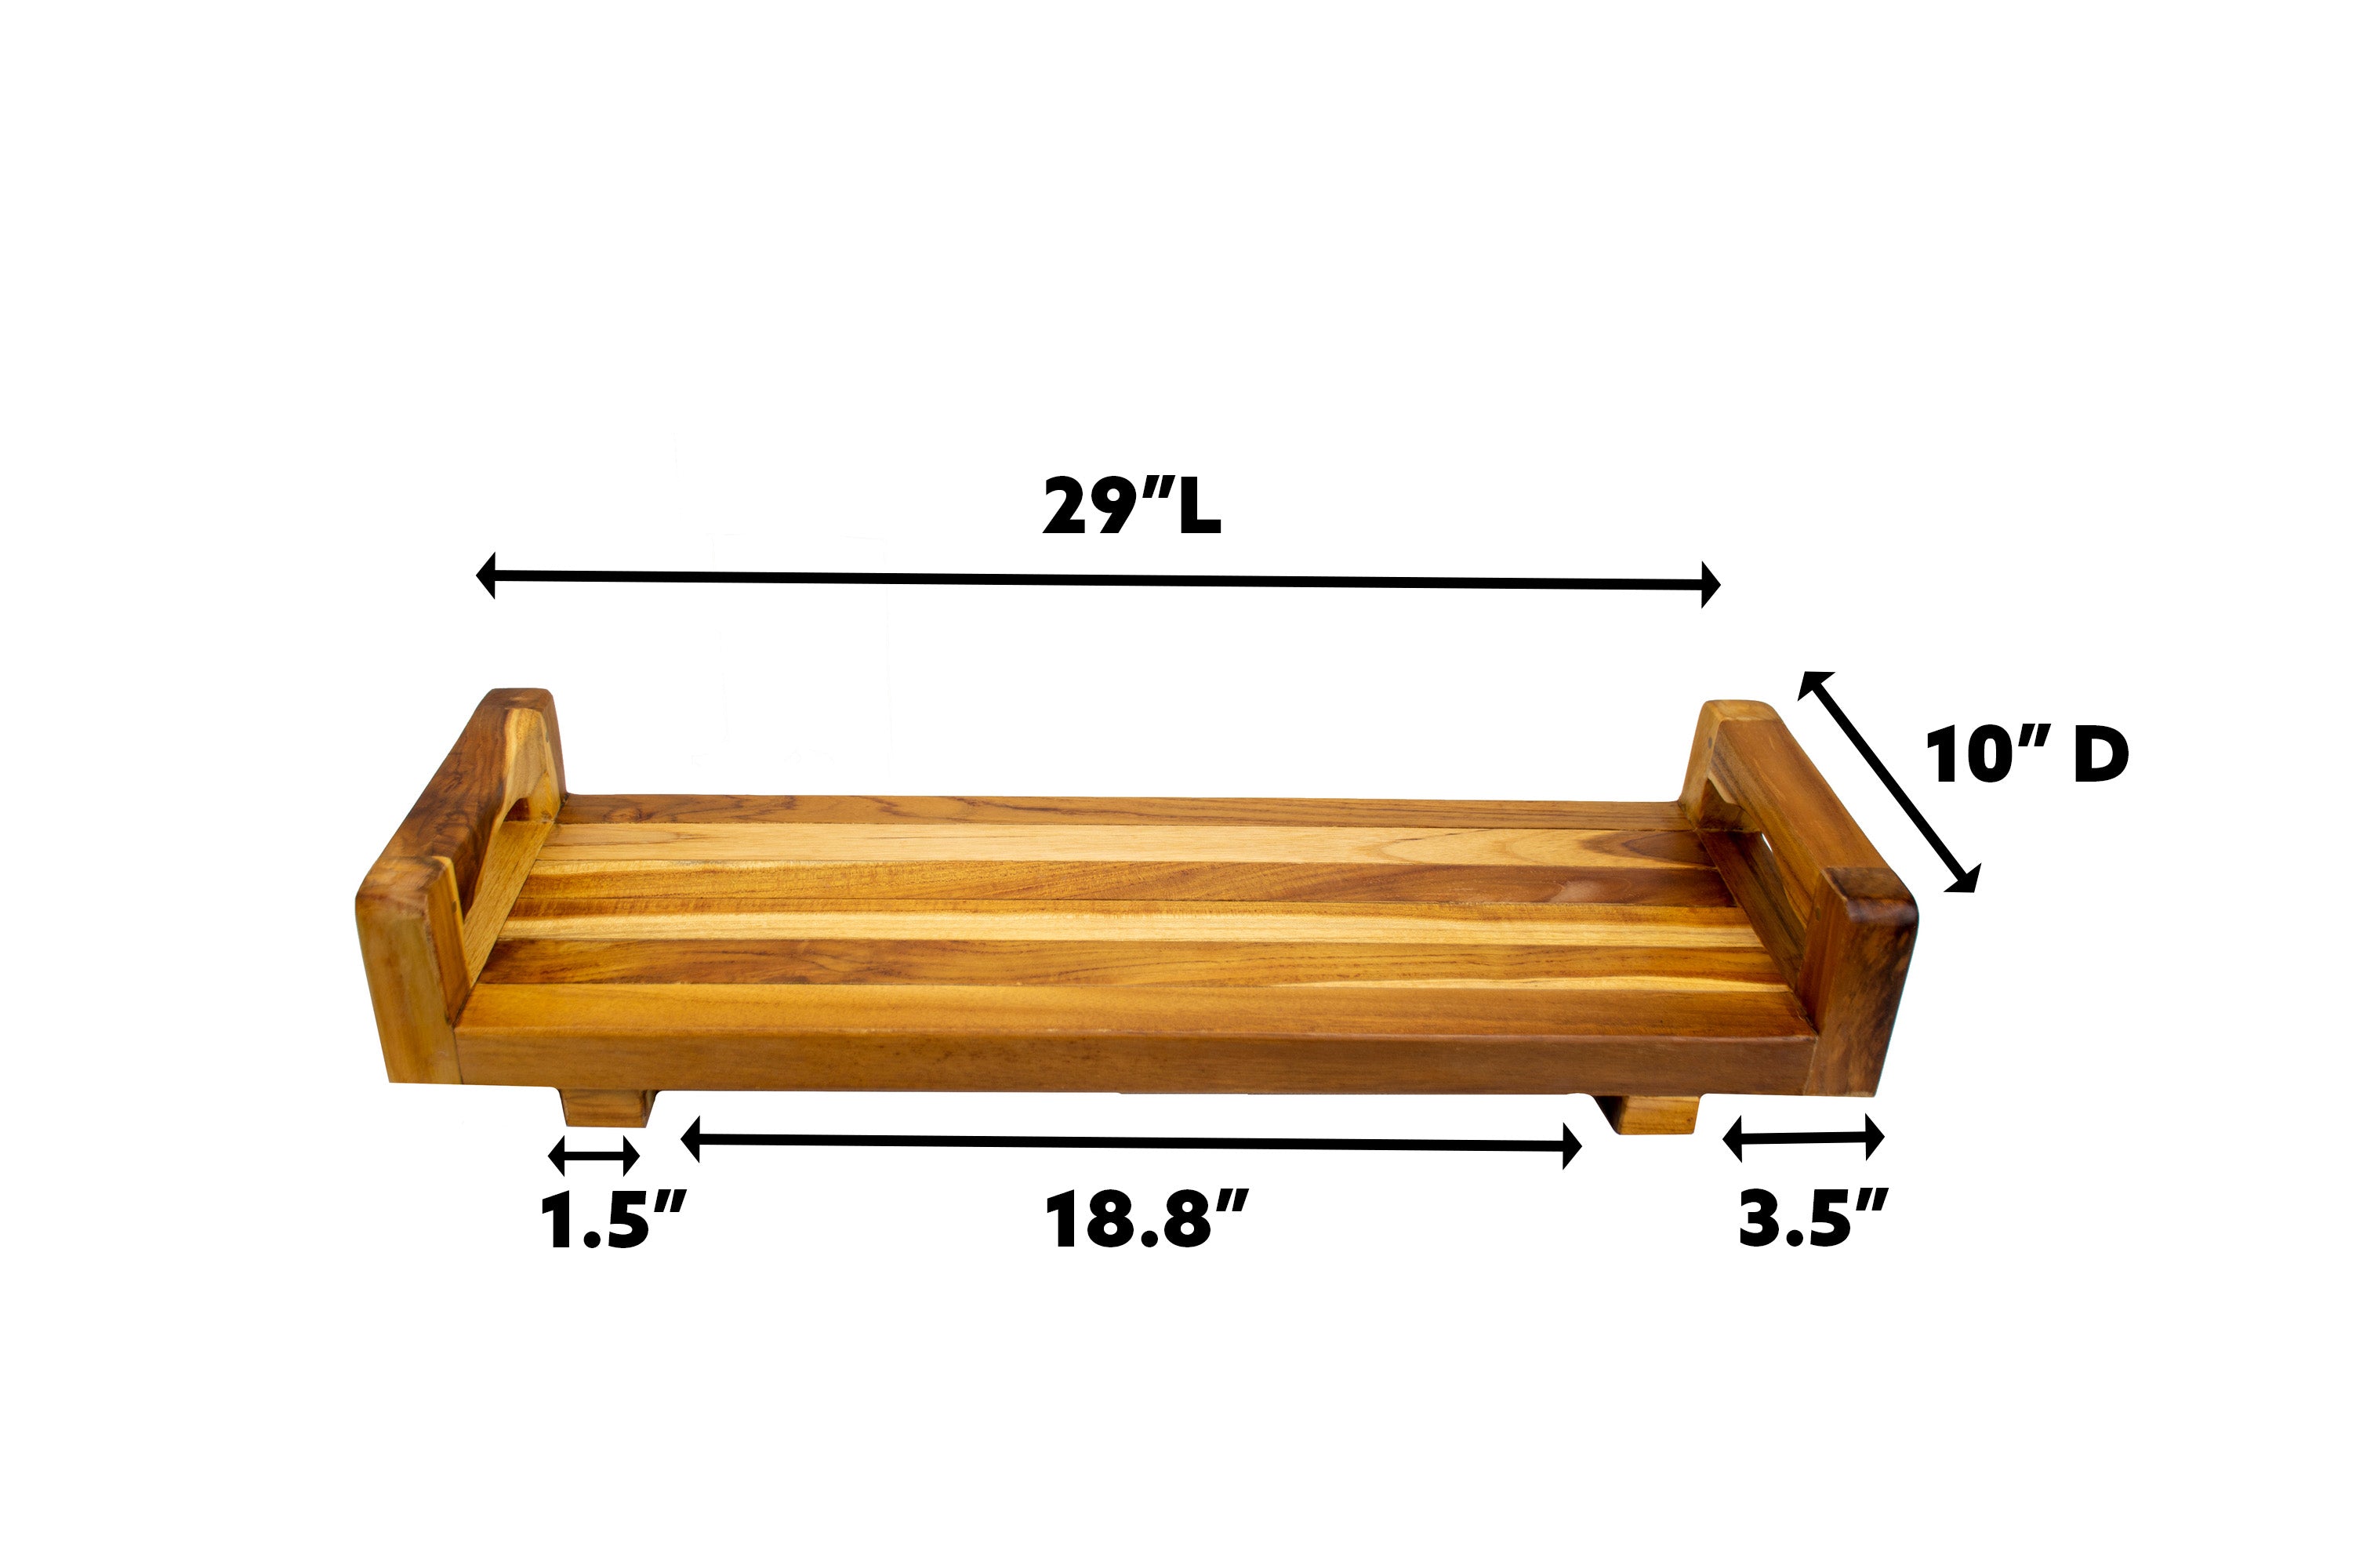 EcoDecors® Eleganto® 29" Teak Wood Bath Tray and Seat with LiftAide® Arms in EarthyTeak Finish